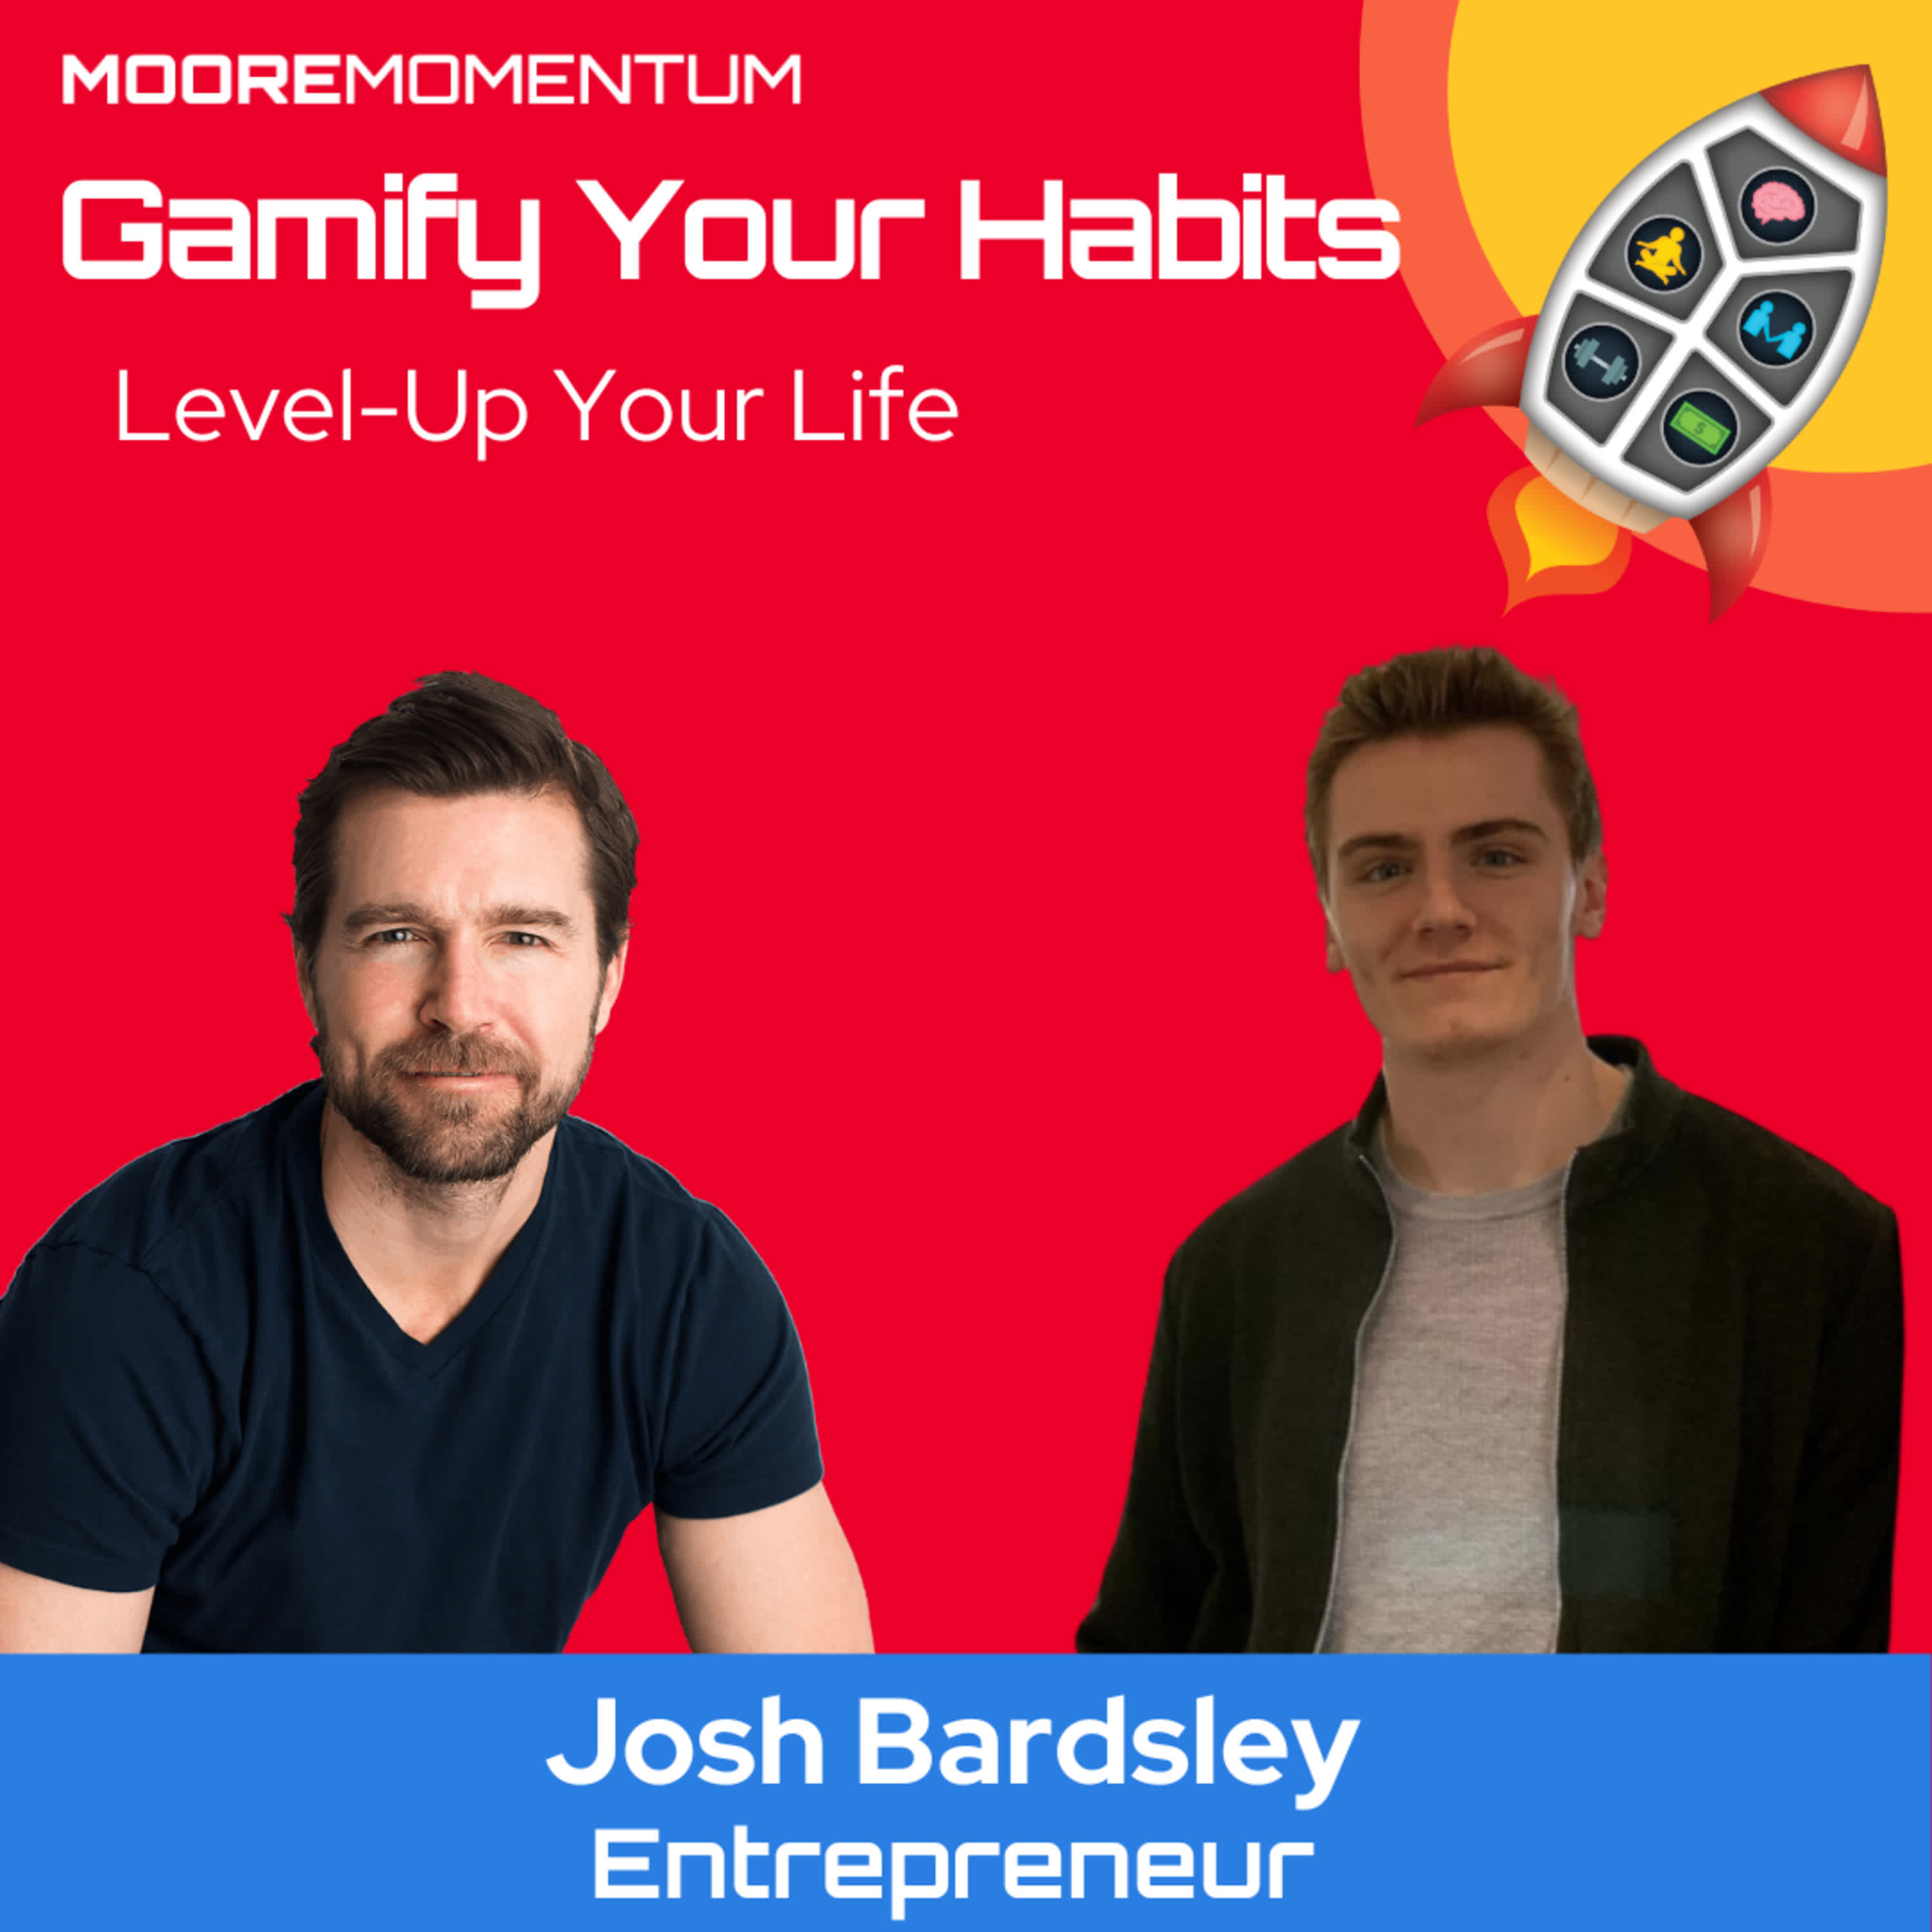 In Winning the Lottery, Your Finances, and Finding Success, host Will Moore sits down with Josh Bardsley, to discuss success, happiness, and finances.